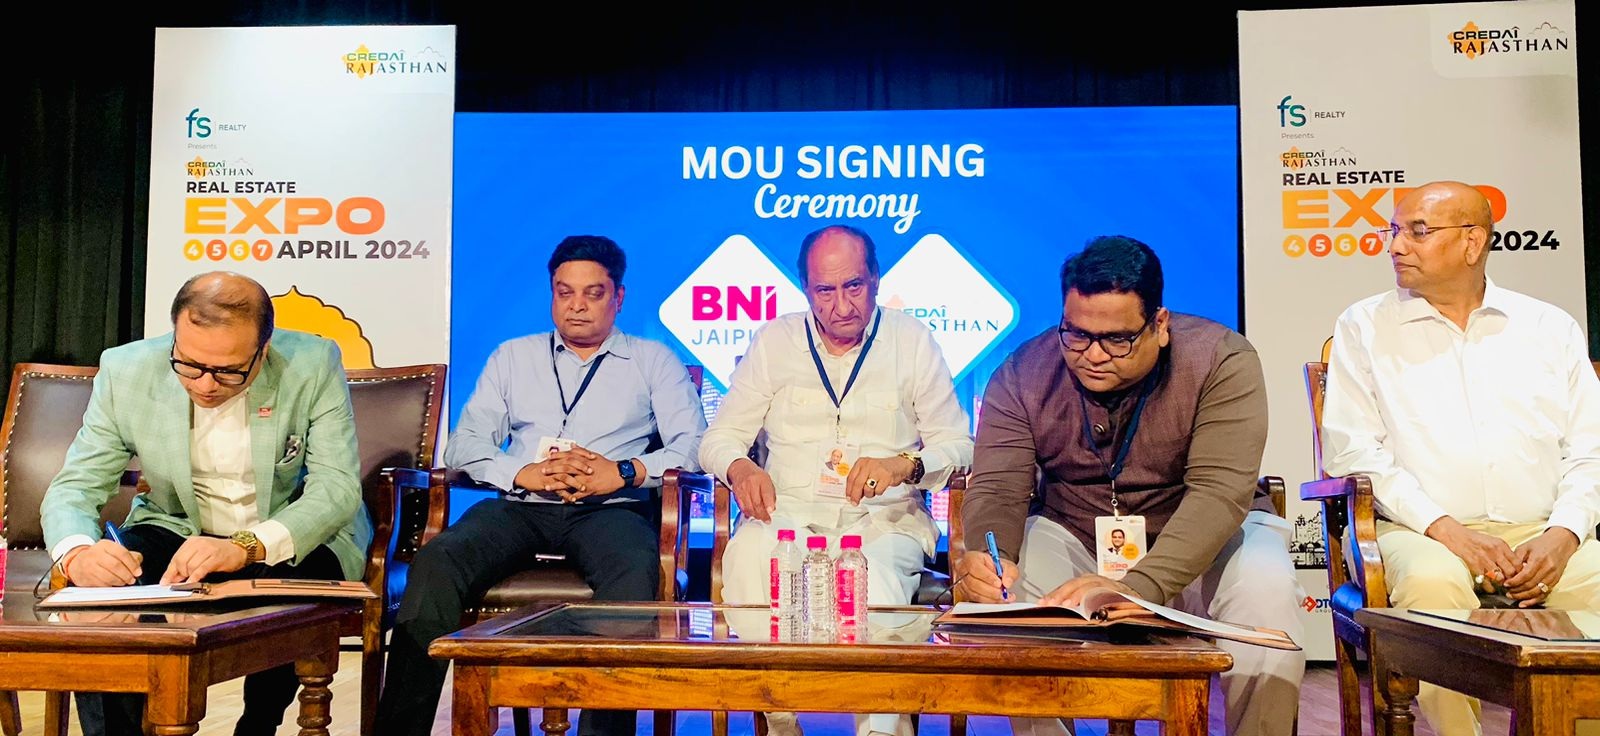 MoU between BNI Jaipur and CREDAI Rajasthan to increase networking and business